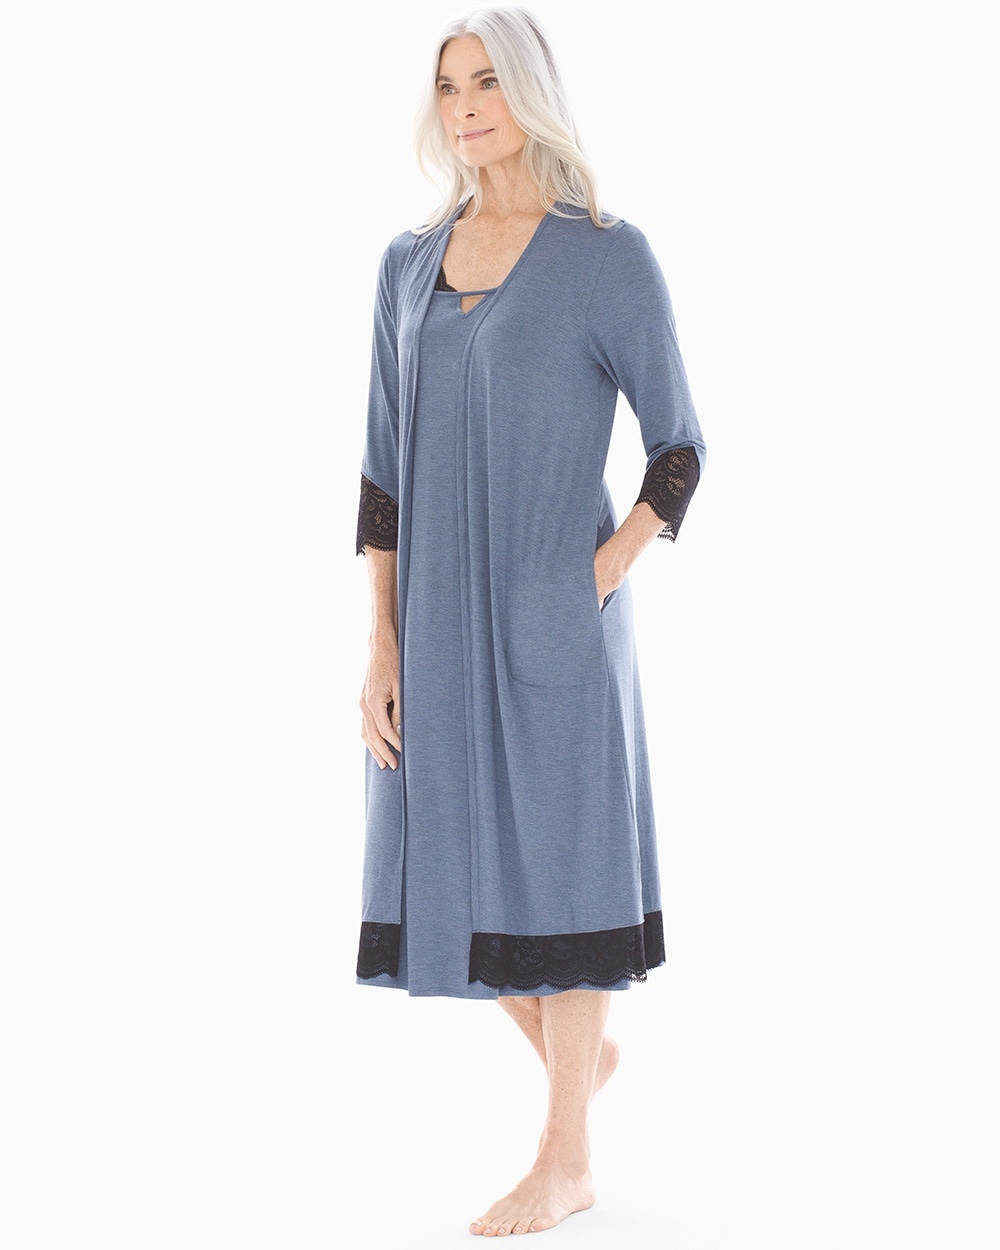 Cool Nights Lace Trim Duster Robe Heather Shadow Blue